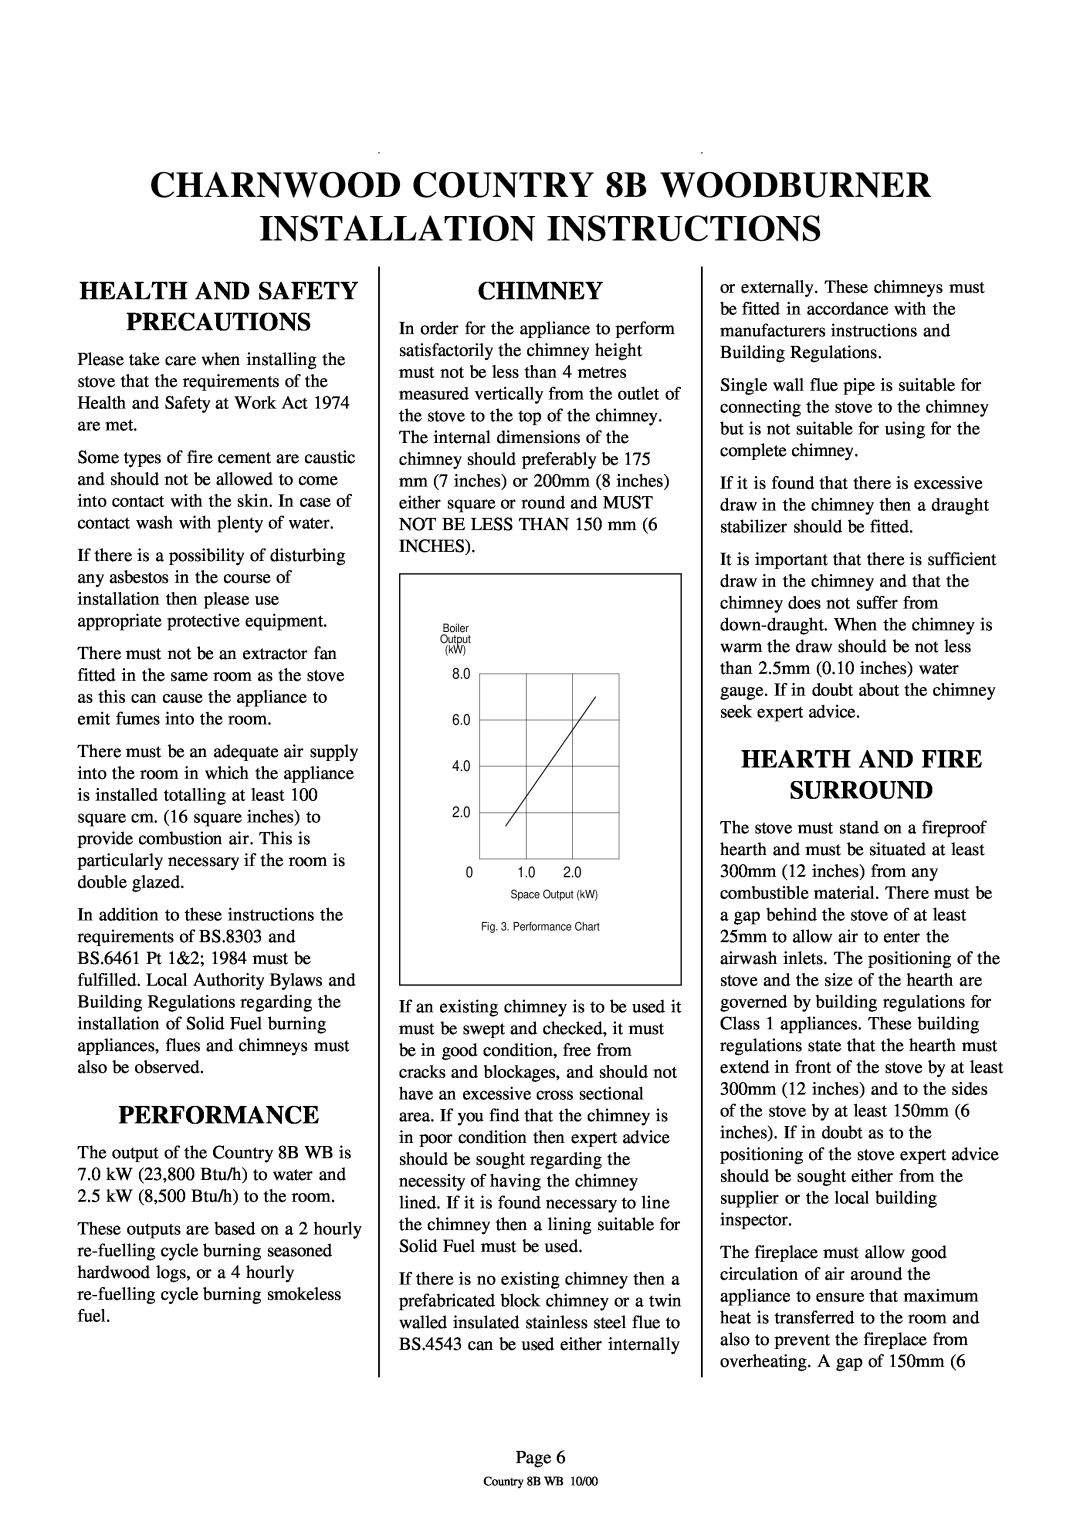 Charnwood Country 8B CHARNWOOD COUNTRY 8B WOODBURNER INSTALLATION INSTRUCTIONS, Health And Safety Precautions, Performance 